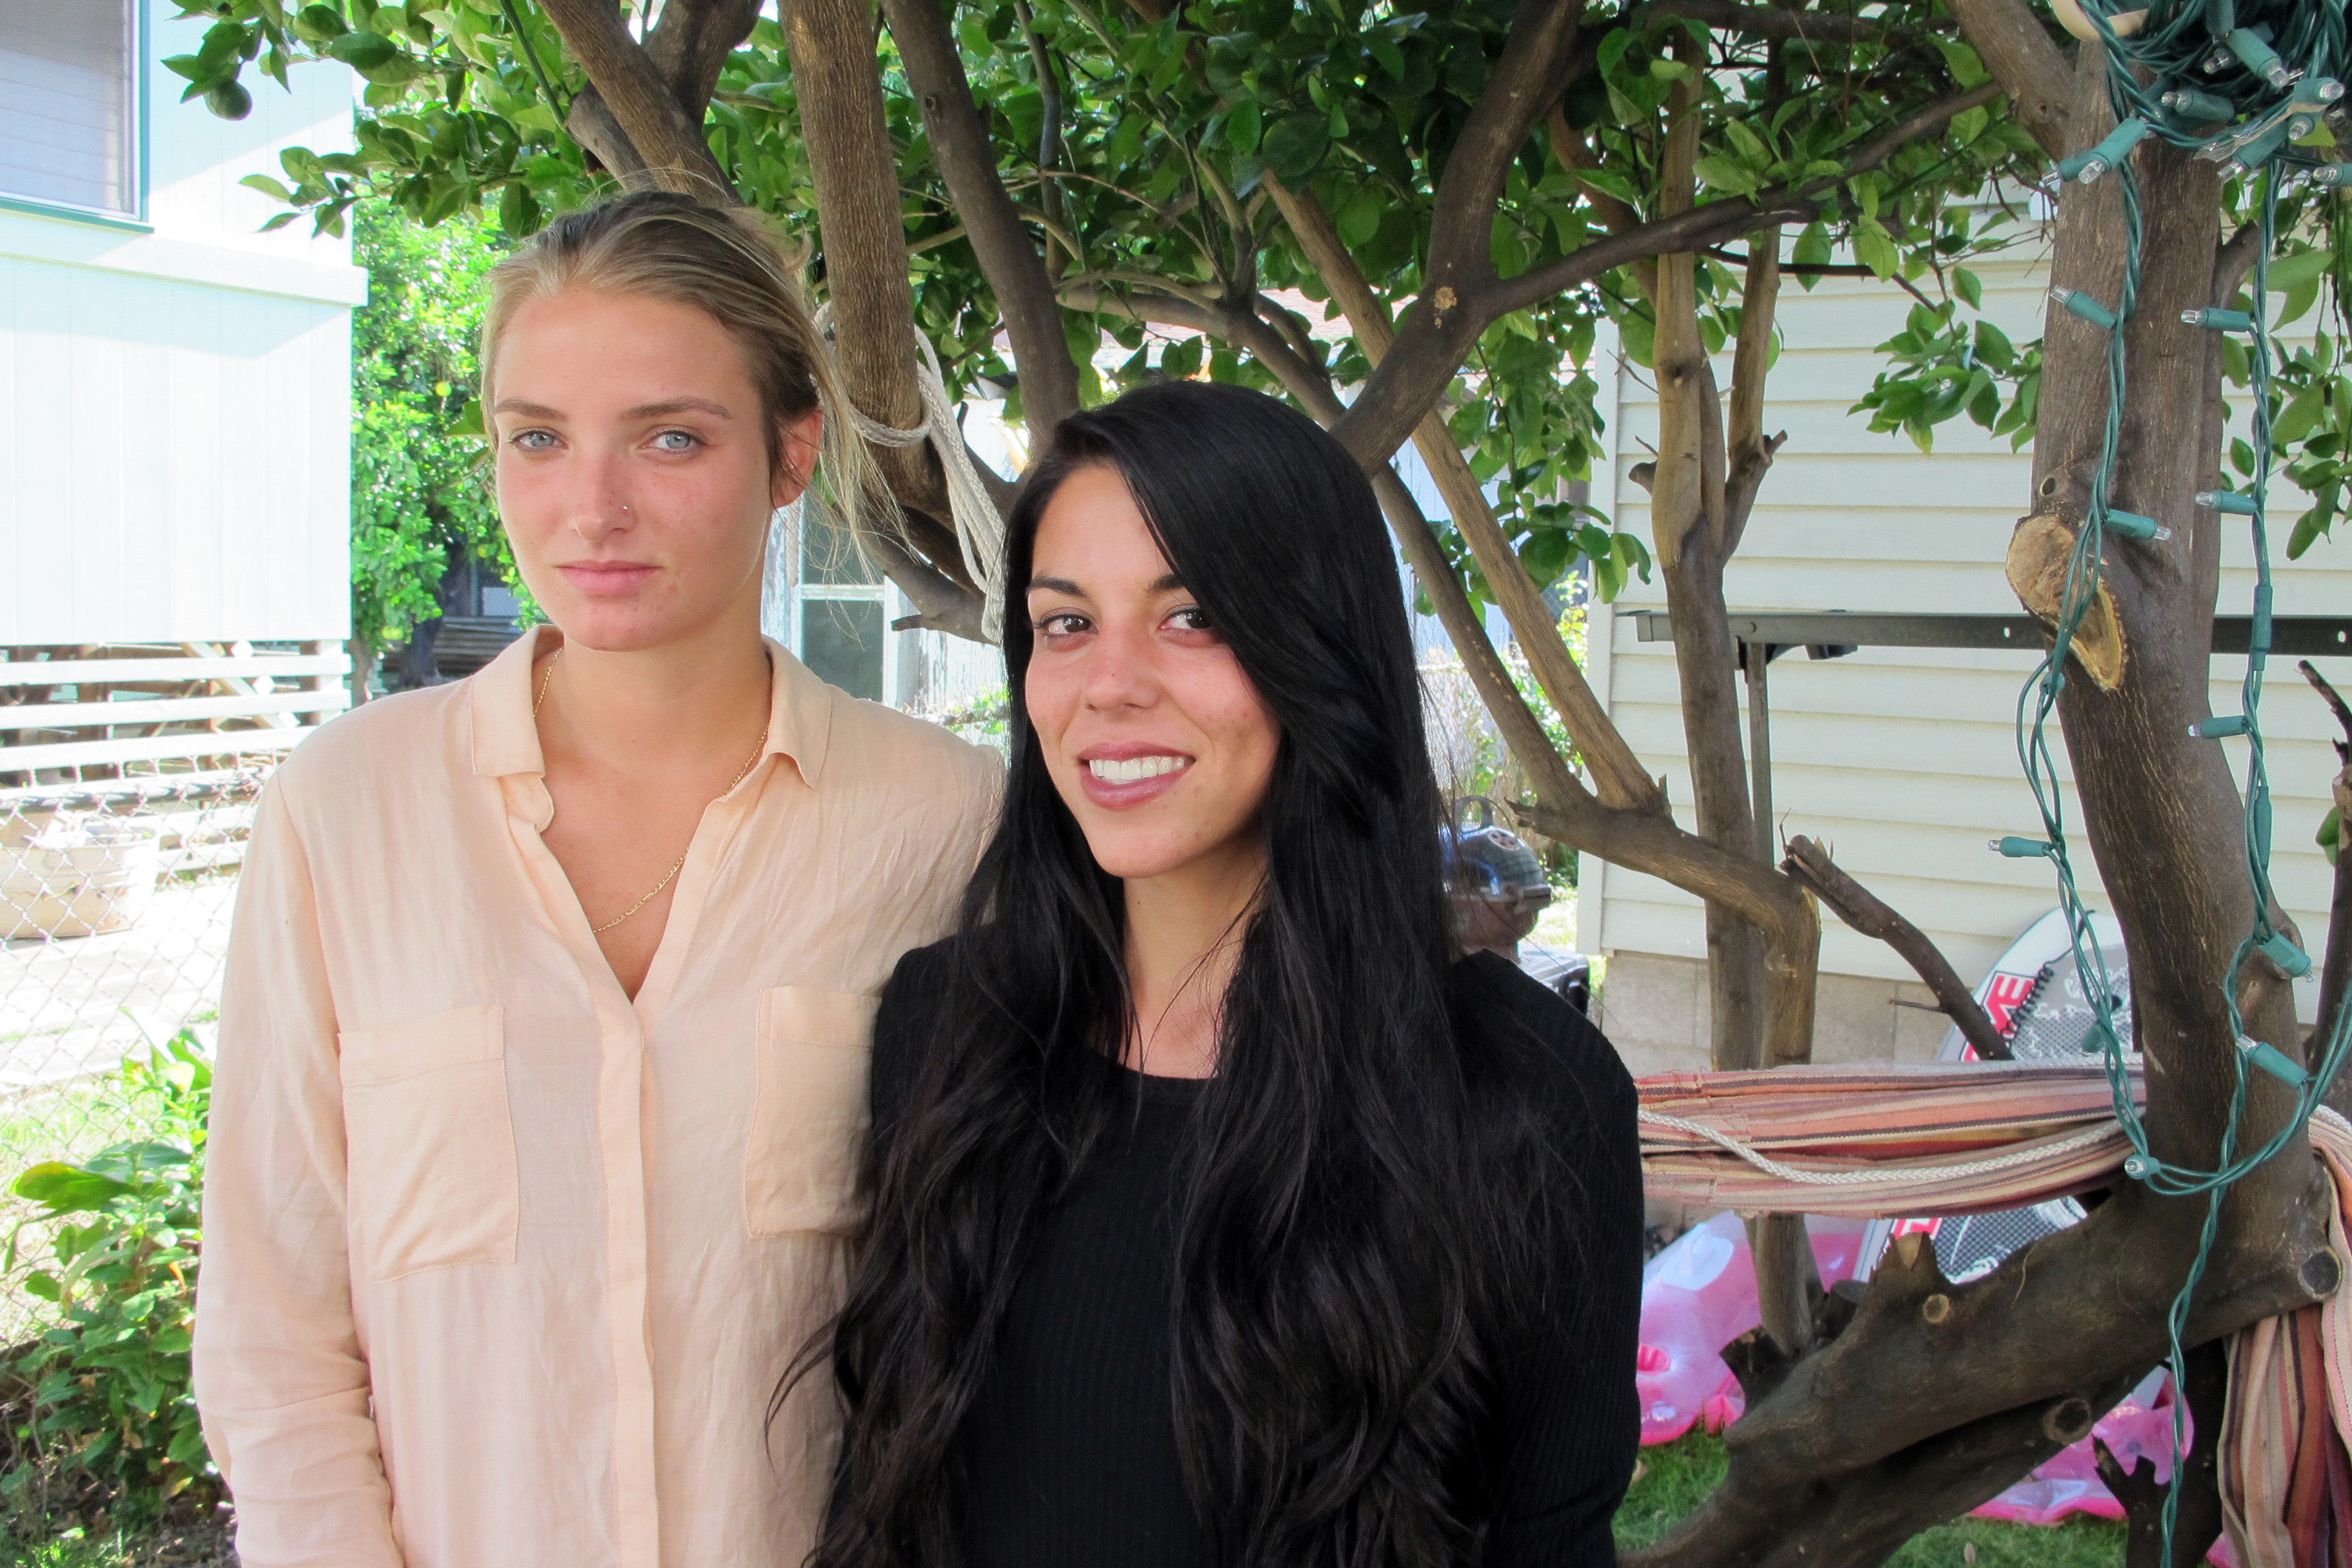 Courney Wilson and Taylor Guerrero who were arrested in Hawaii